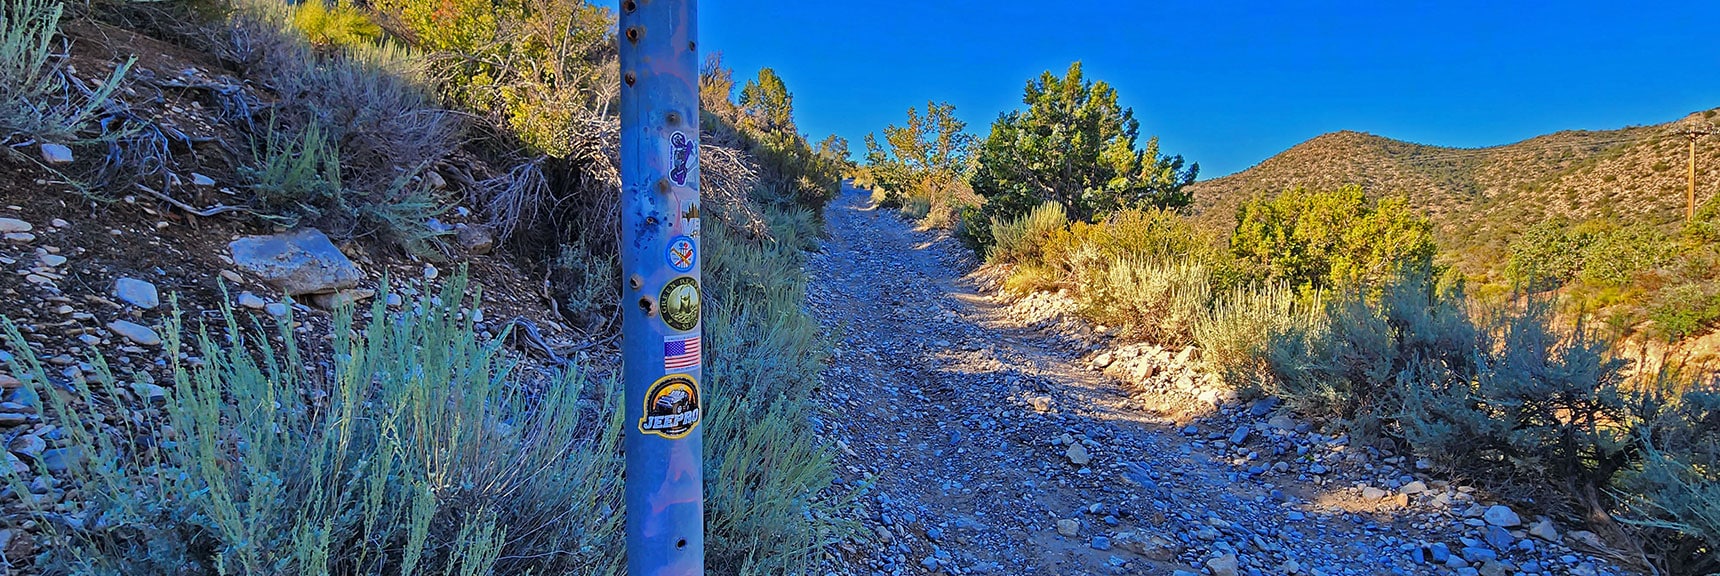 Stickers on Post Identify Types of Vehicles Made for Rocky Gap Road | Rocky Gap Rd to Bridge Mt Trailhead | Lovell Canyon, Nevada